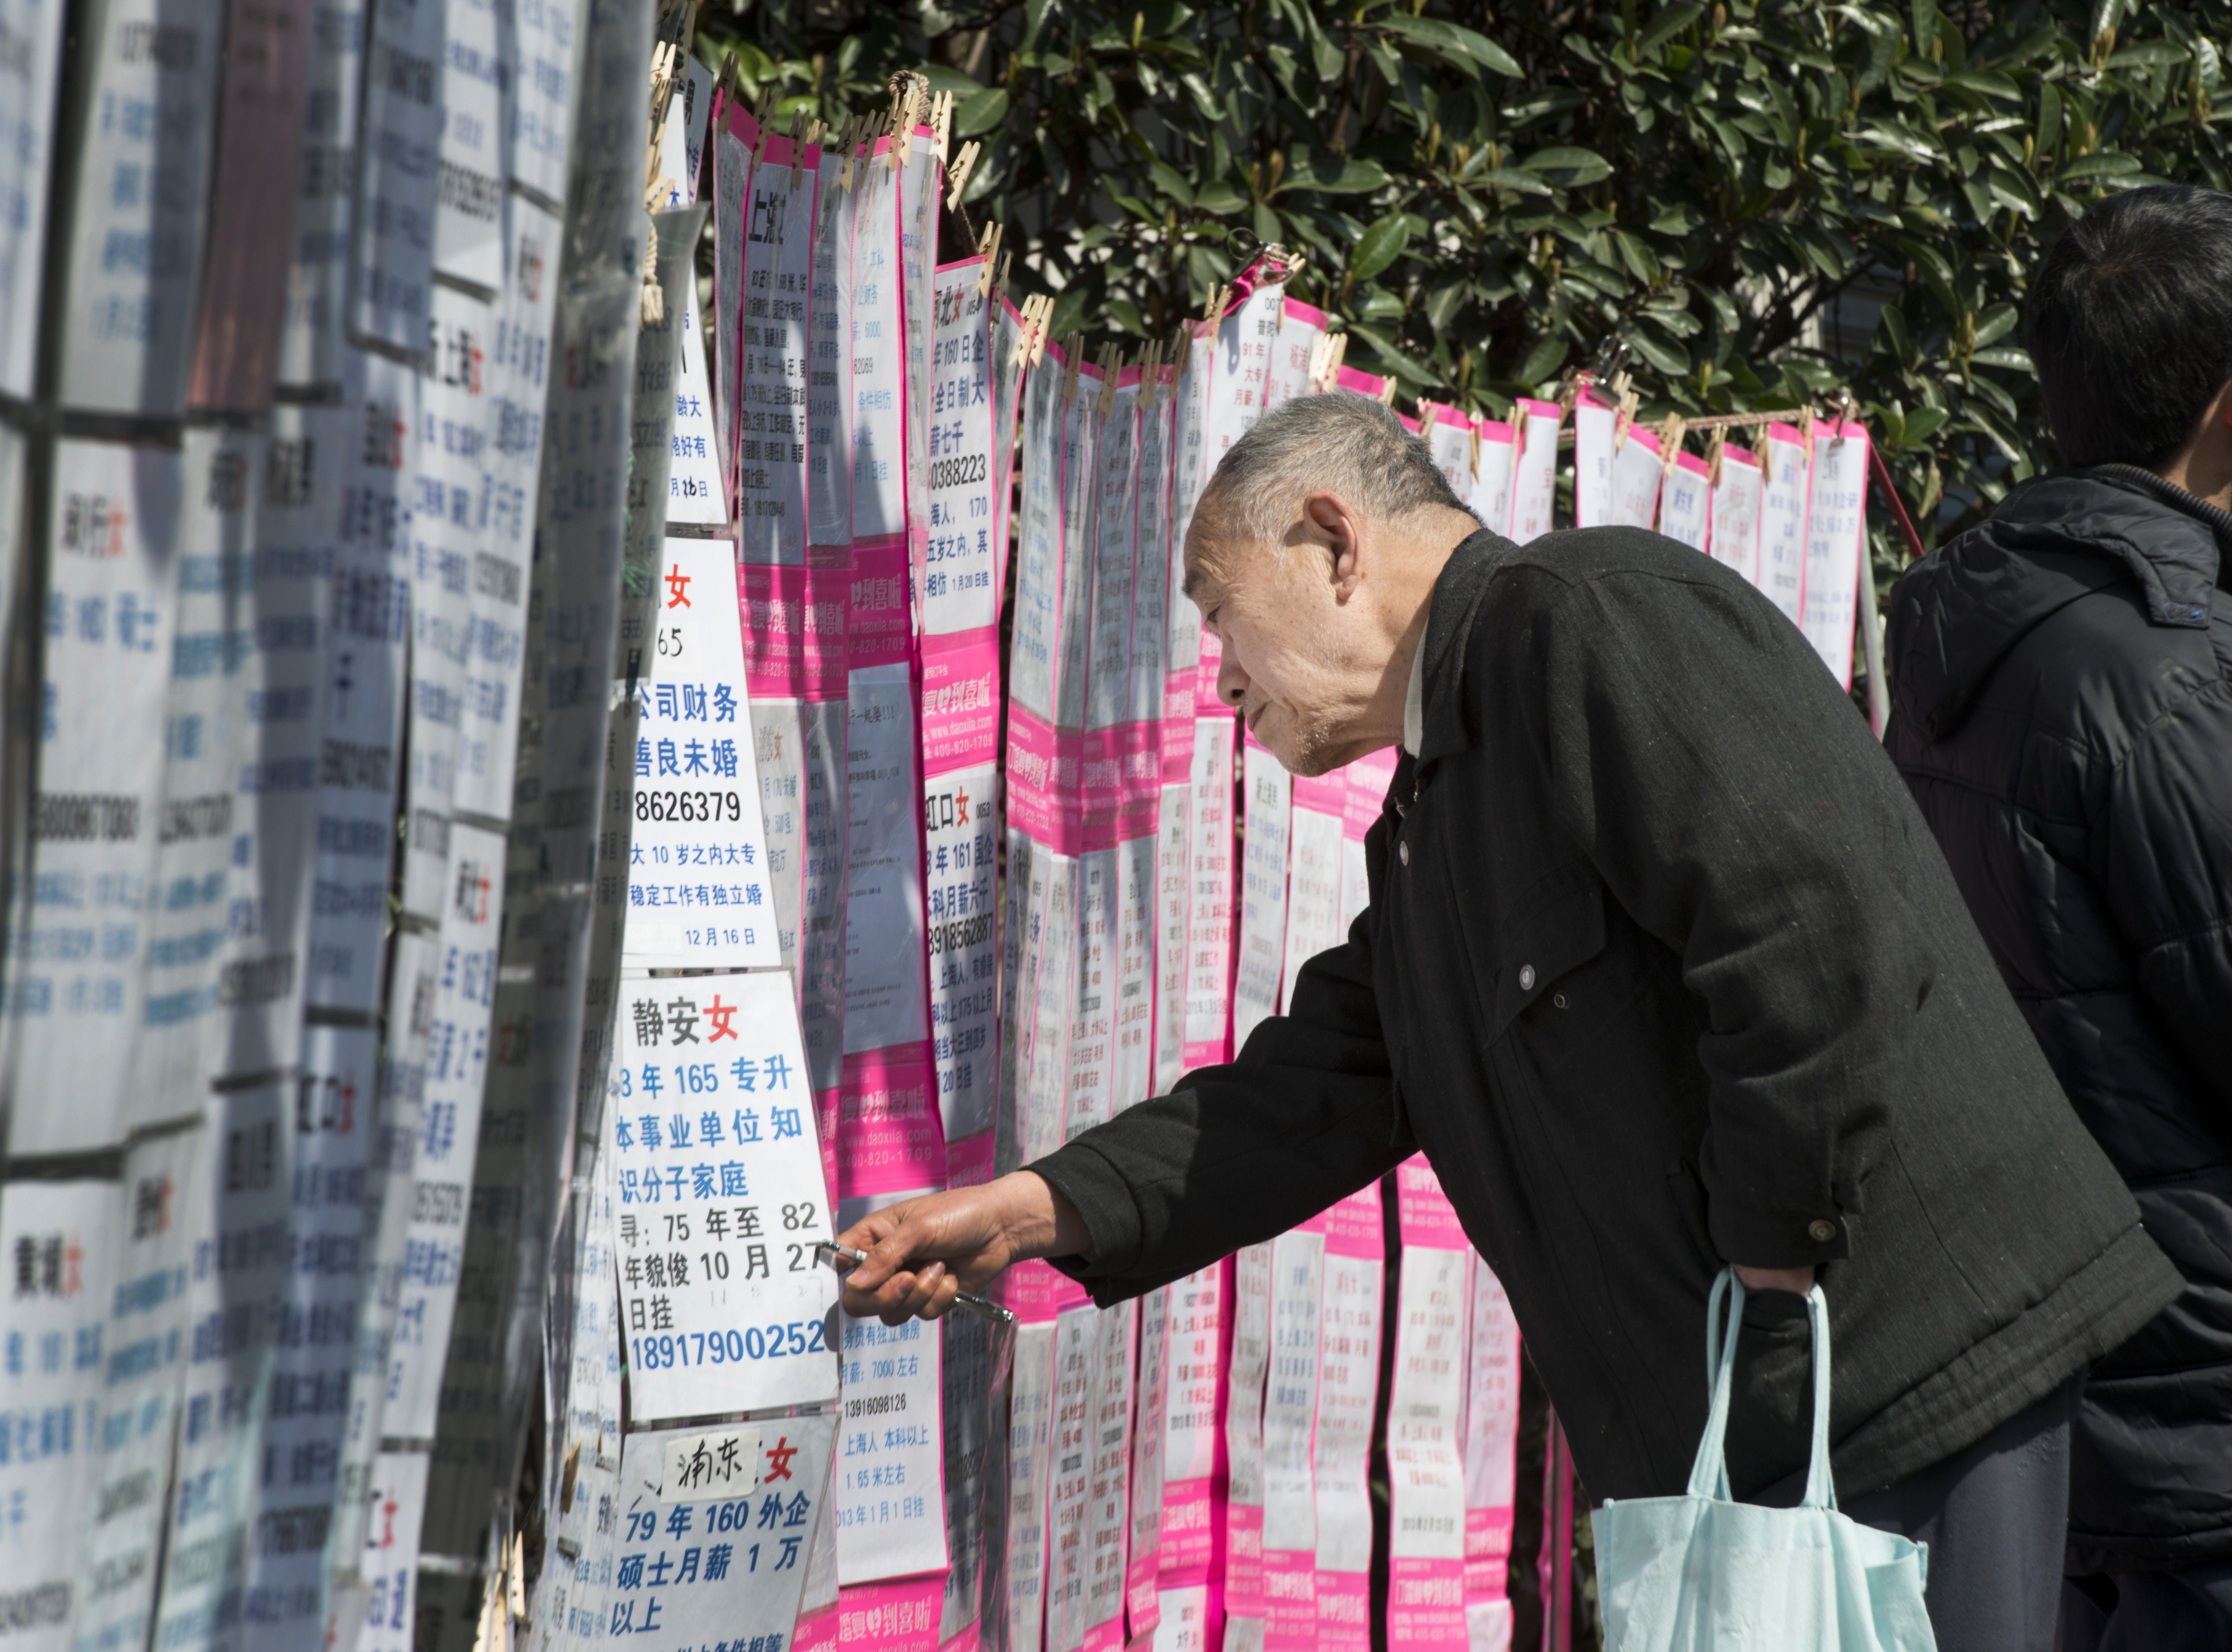 Parents desperate to find partners for their unmarried sons and daughters come to People's Park in Shanghai every weekend to post advertisements describing the desirable traits of their children. (Dave Cole—Penn State University/MCT/Getty Images)